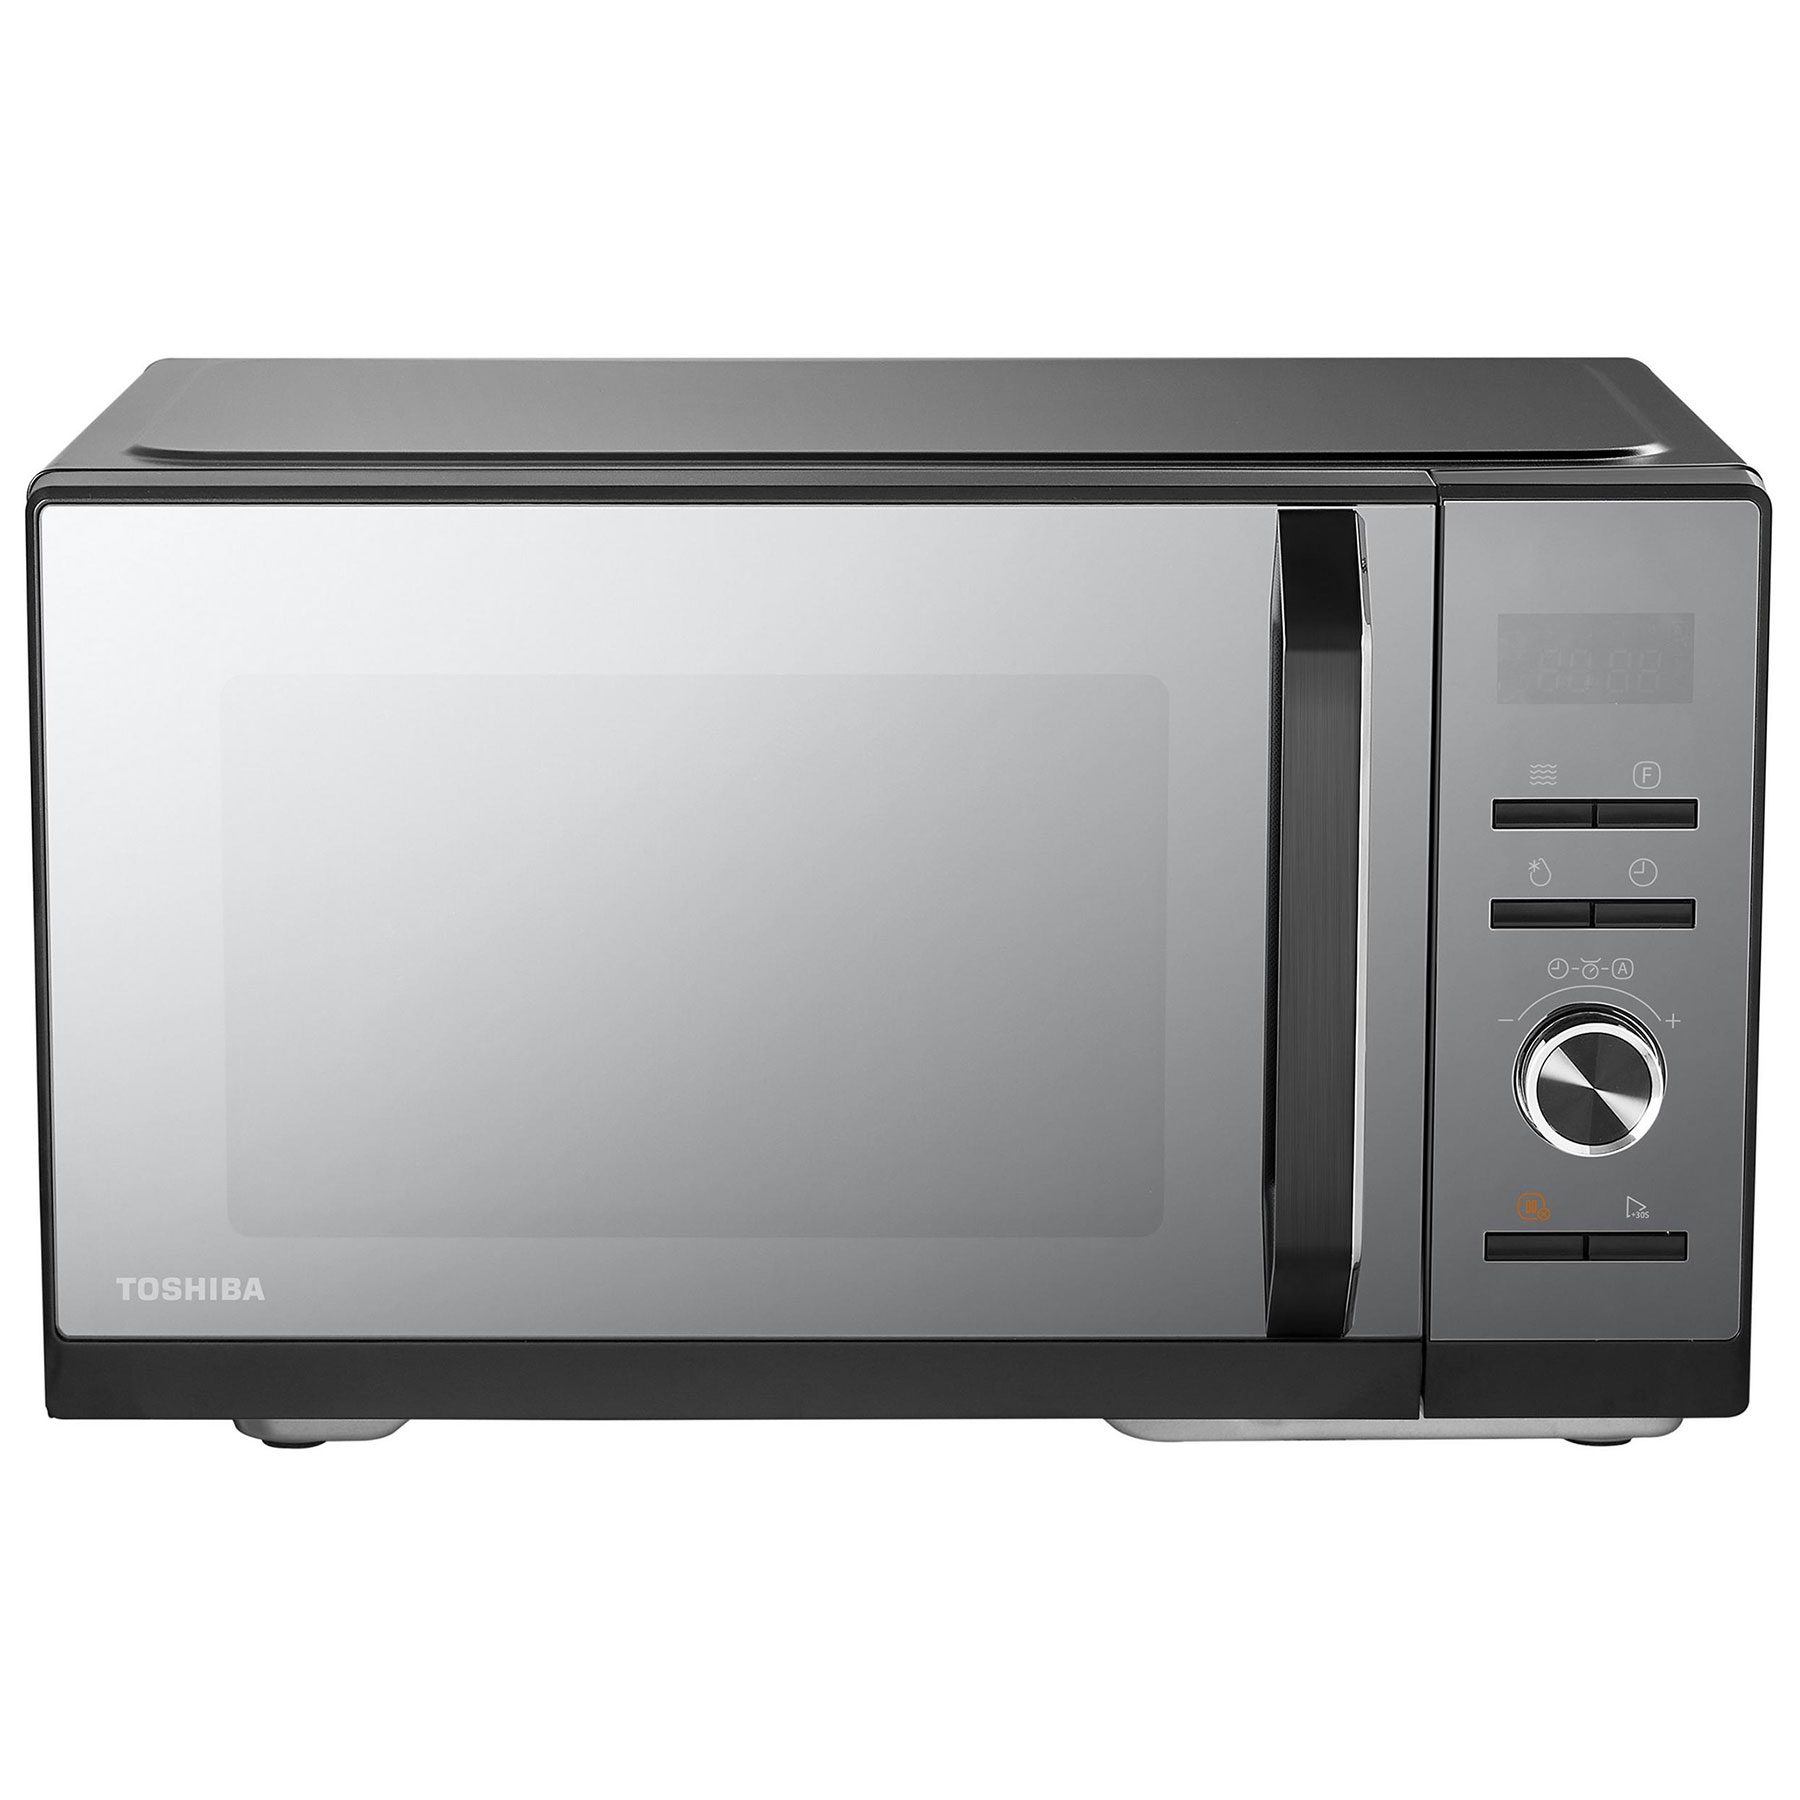 Toshiba MW3 AC26SF Air Fryer Microwave Oven in Black 26L 900W